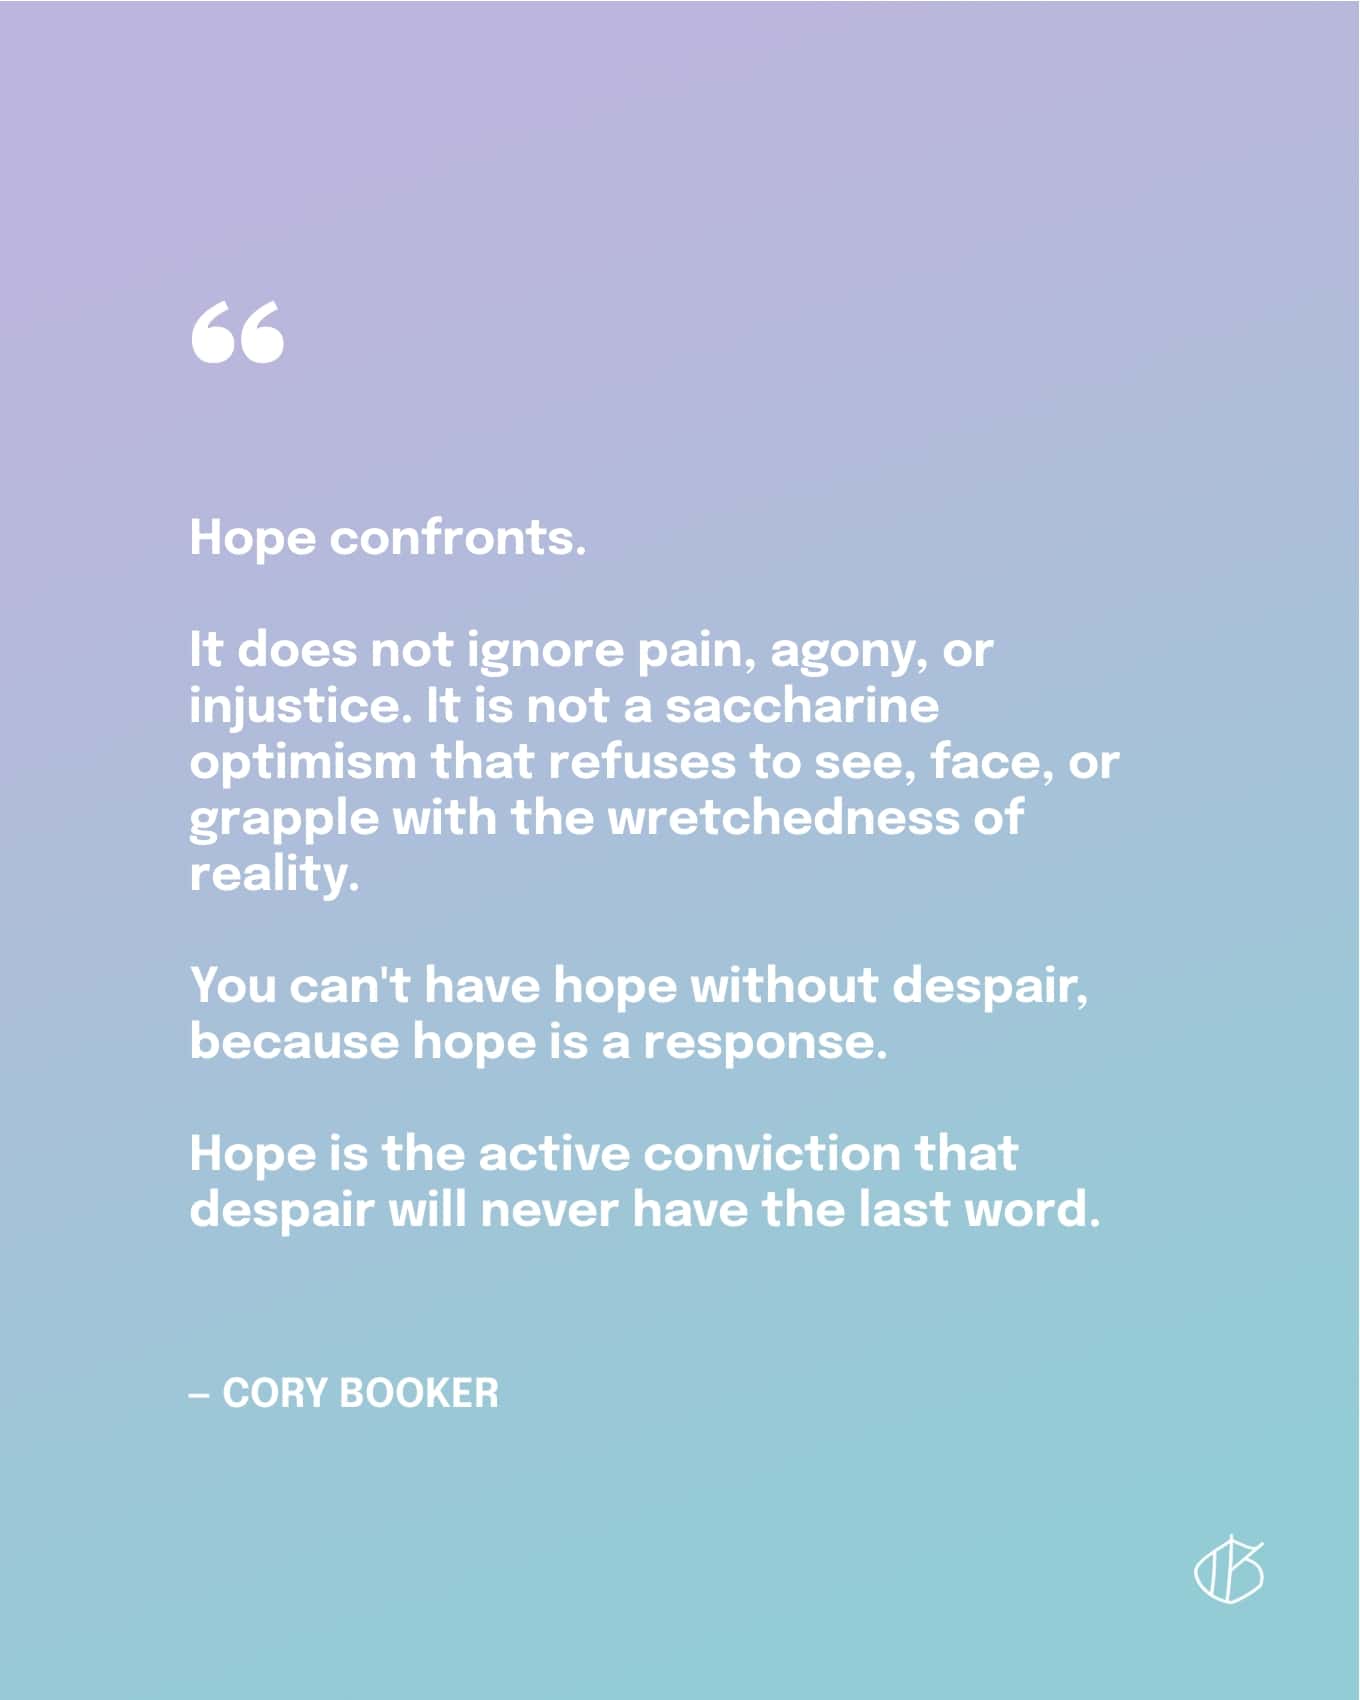 Quote: Hope confronts. It does not ignore pain, agony, or injustice. It is not a saccharine optimism that refuses to see, face, or grapple with the wretchedness of reality. You can't have hope without despair, because hope is a response. Hope is the active conviction that despair will never have the last word. — Cory Booker